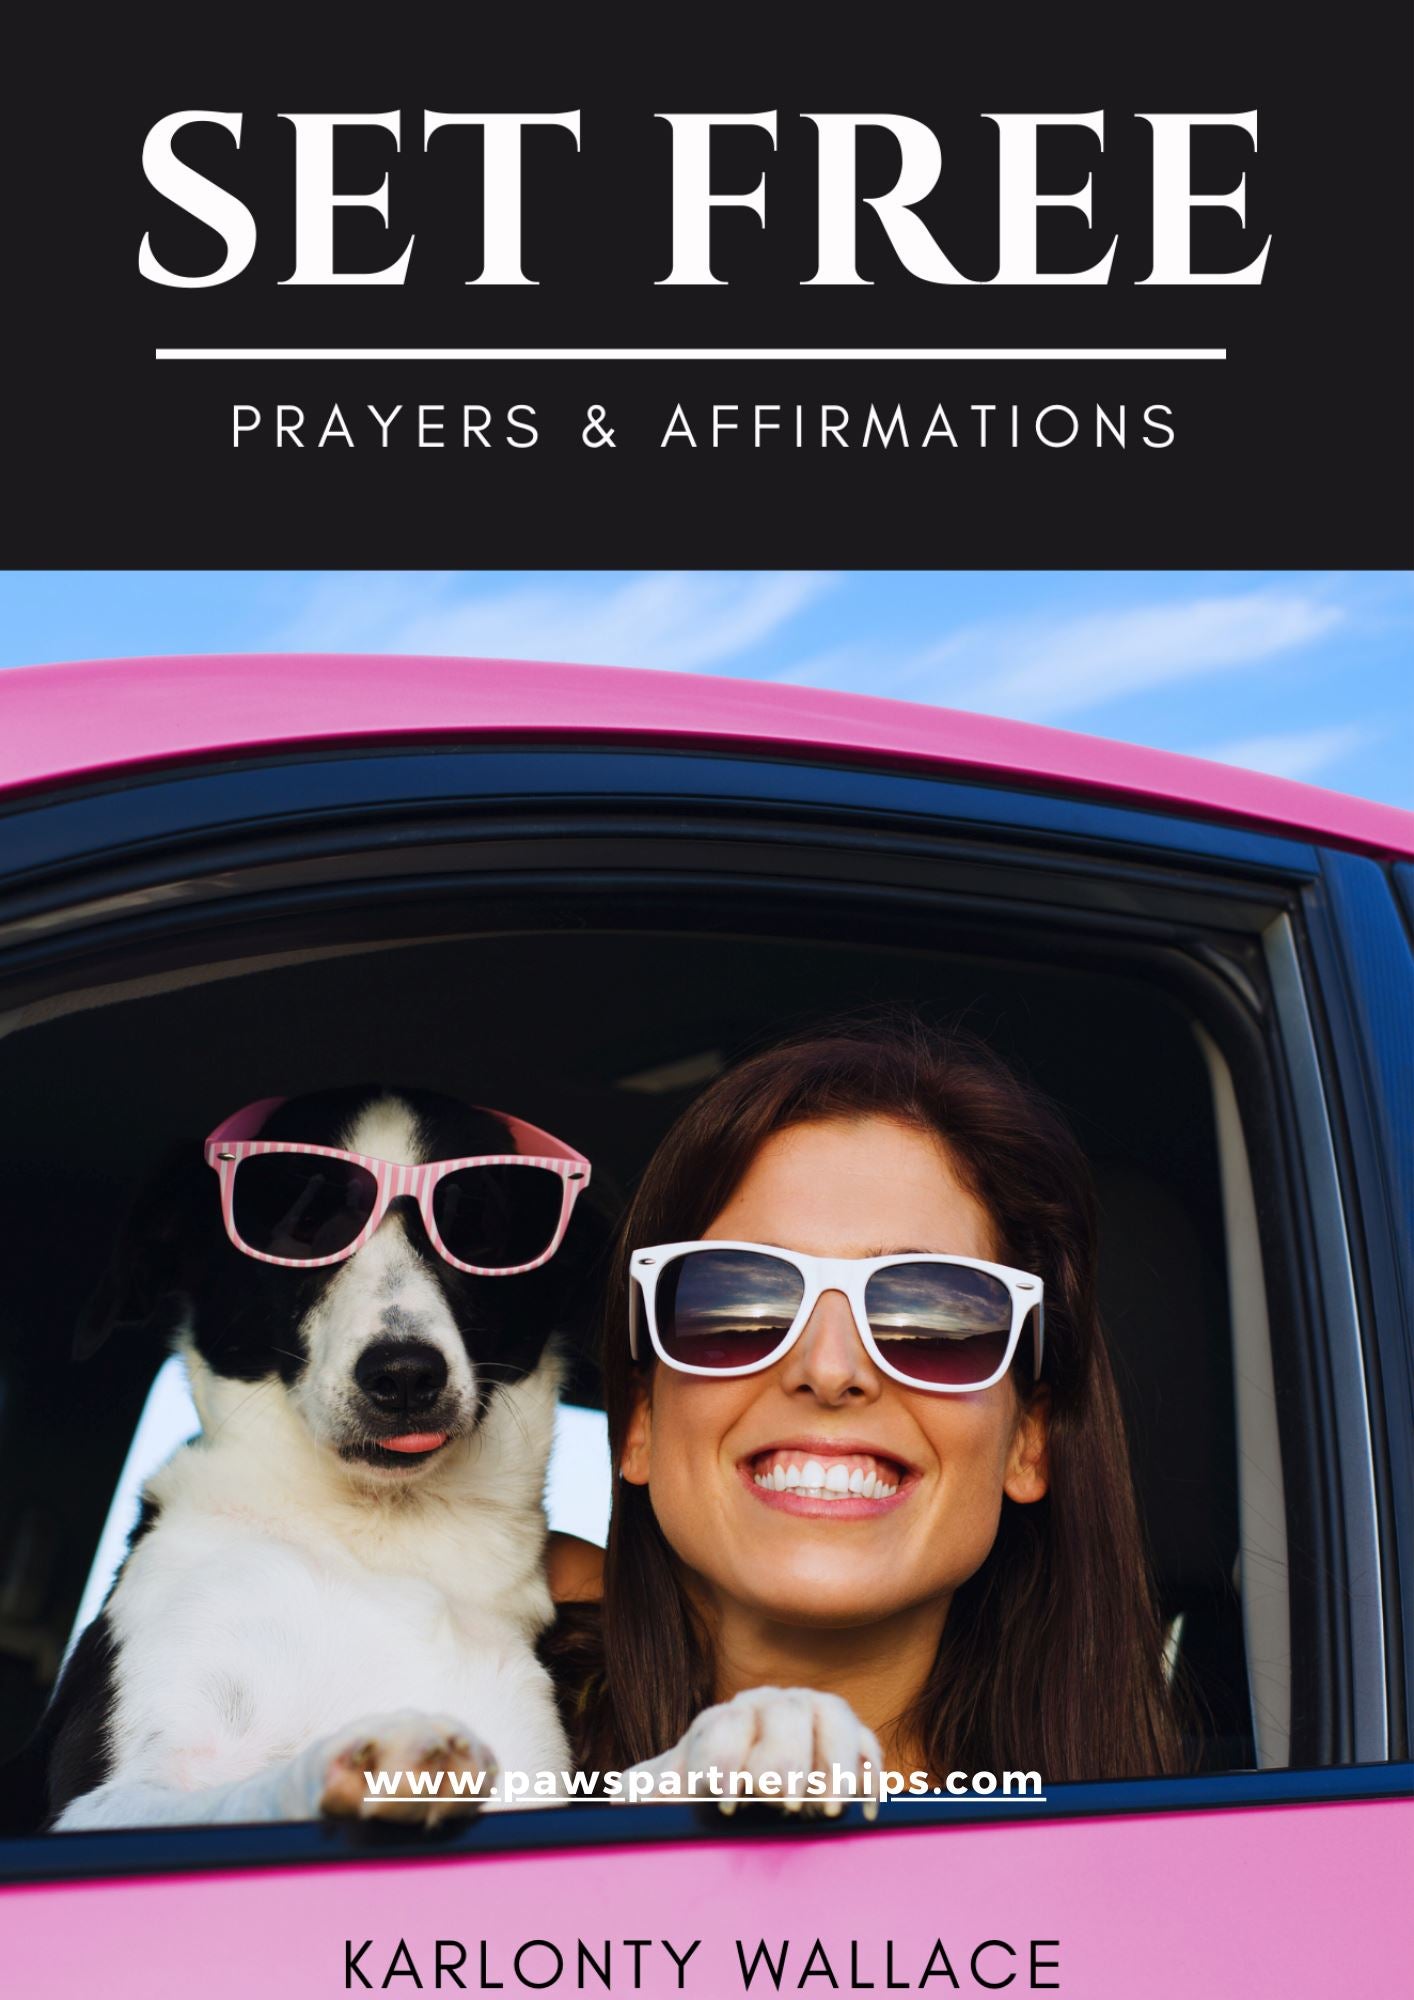 This Set Free Prayer and Affirmations helps you bring positivity into your life with its collection of inspiring affirmations and prayers. The book is filled with words of affirmation and prayer that will help every reader to find peace and comfort. Enjoy a daily dose of positive energy with this powerful book of prayers and affirmations.